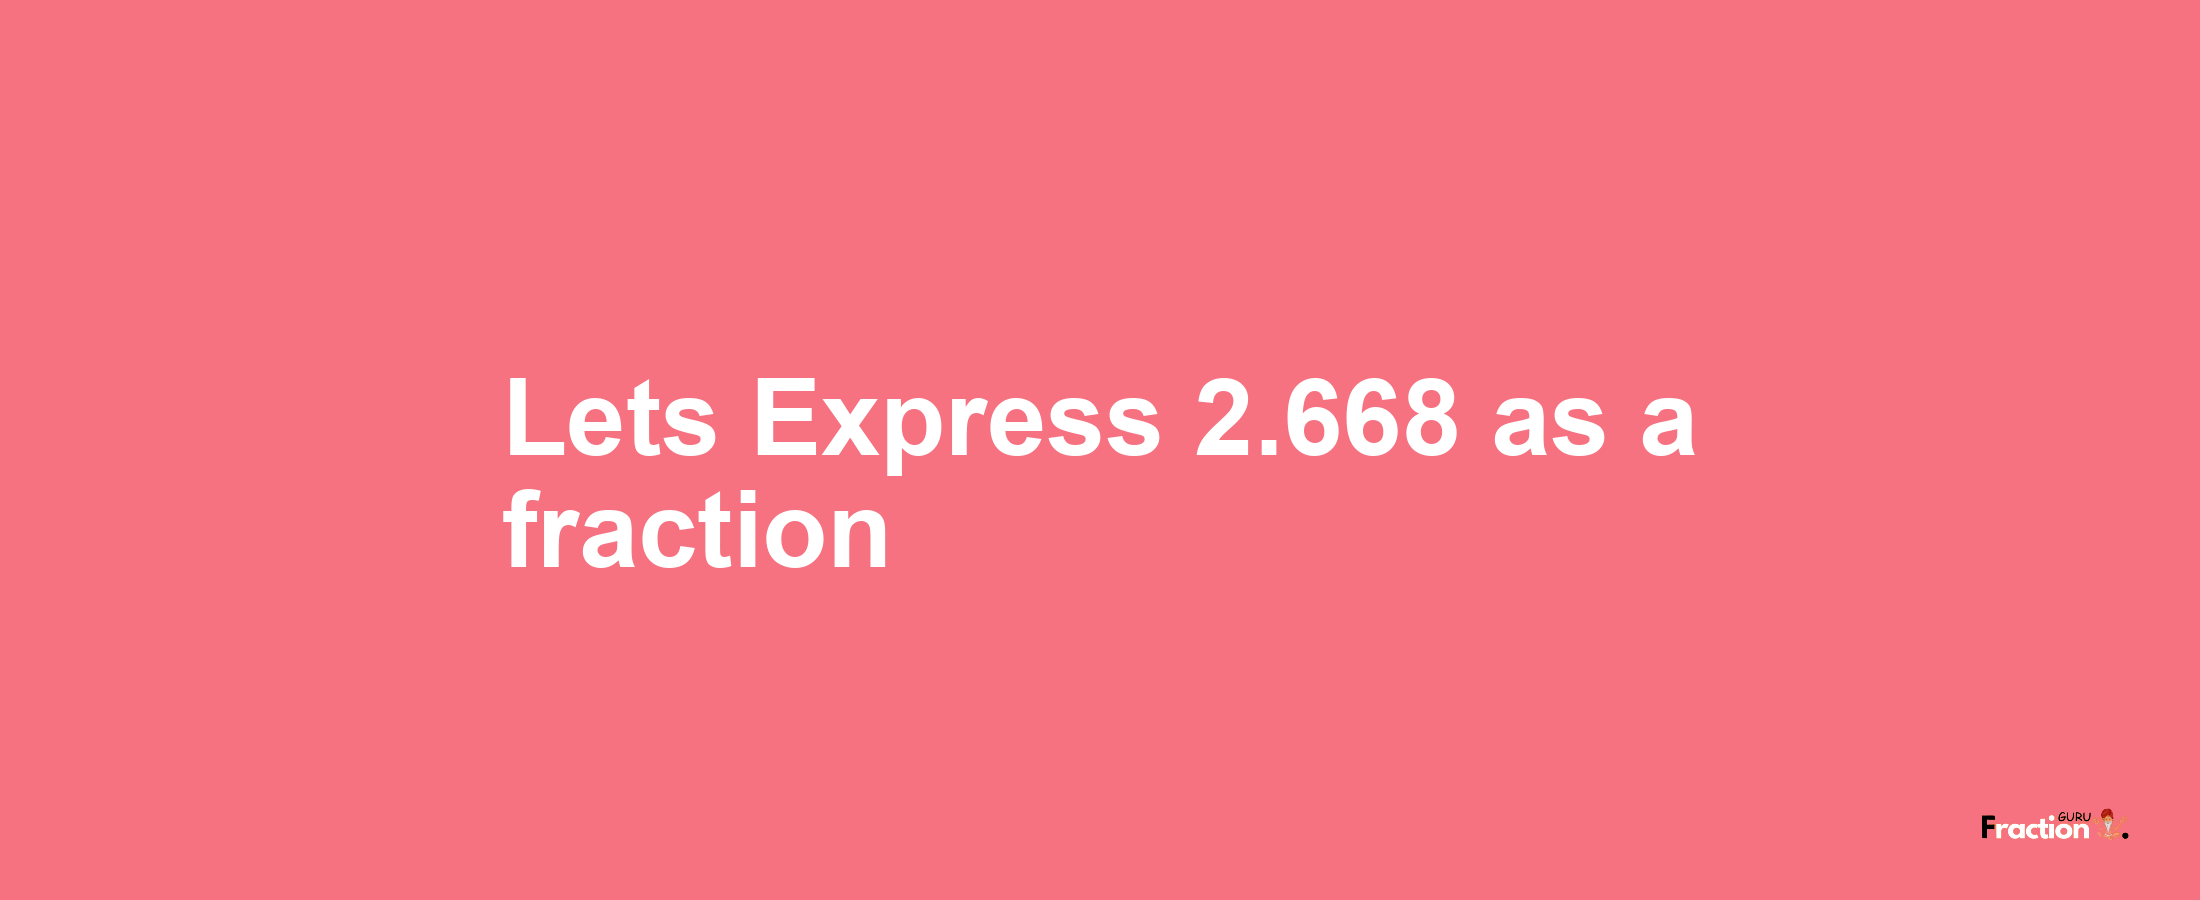 Lets Express 2.668 as afraction